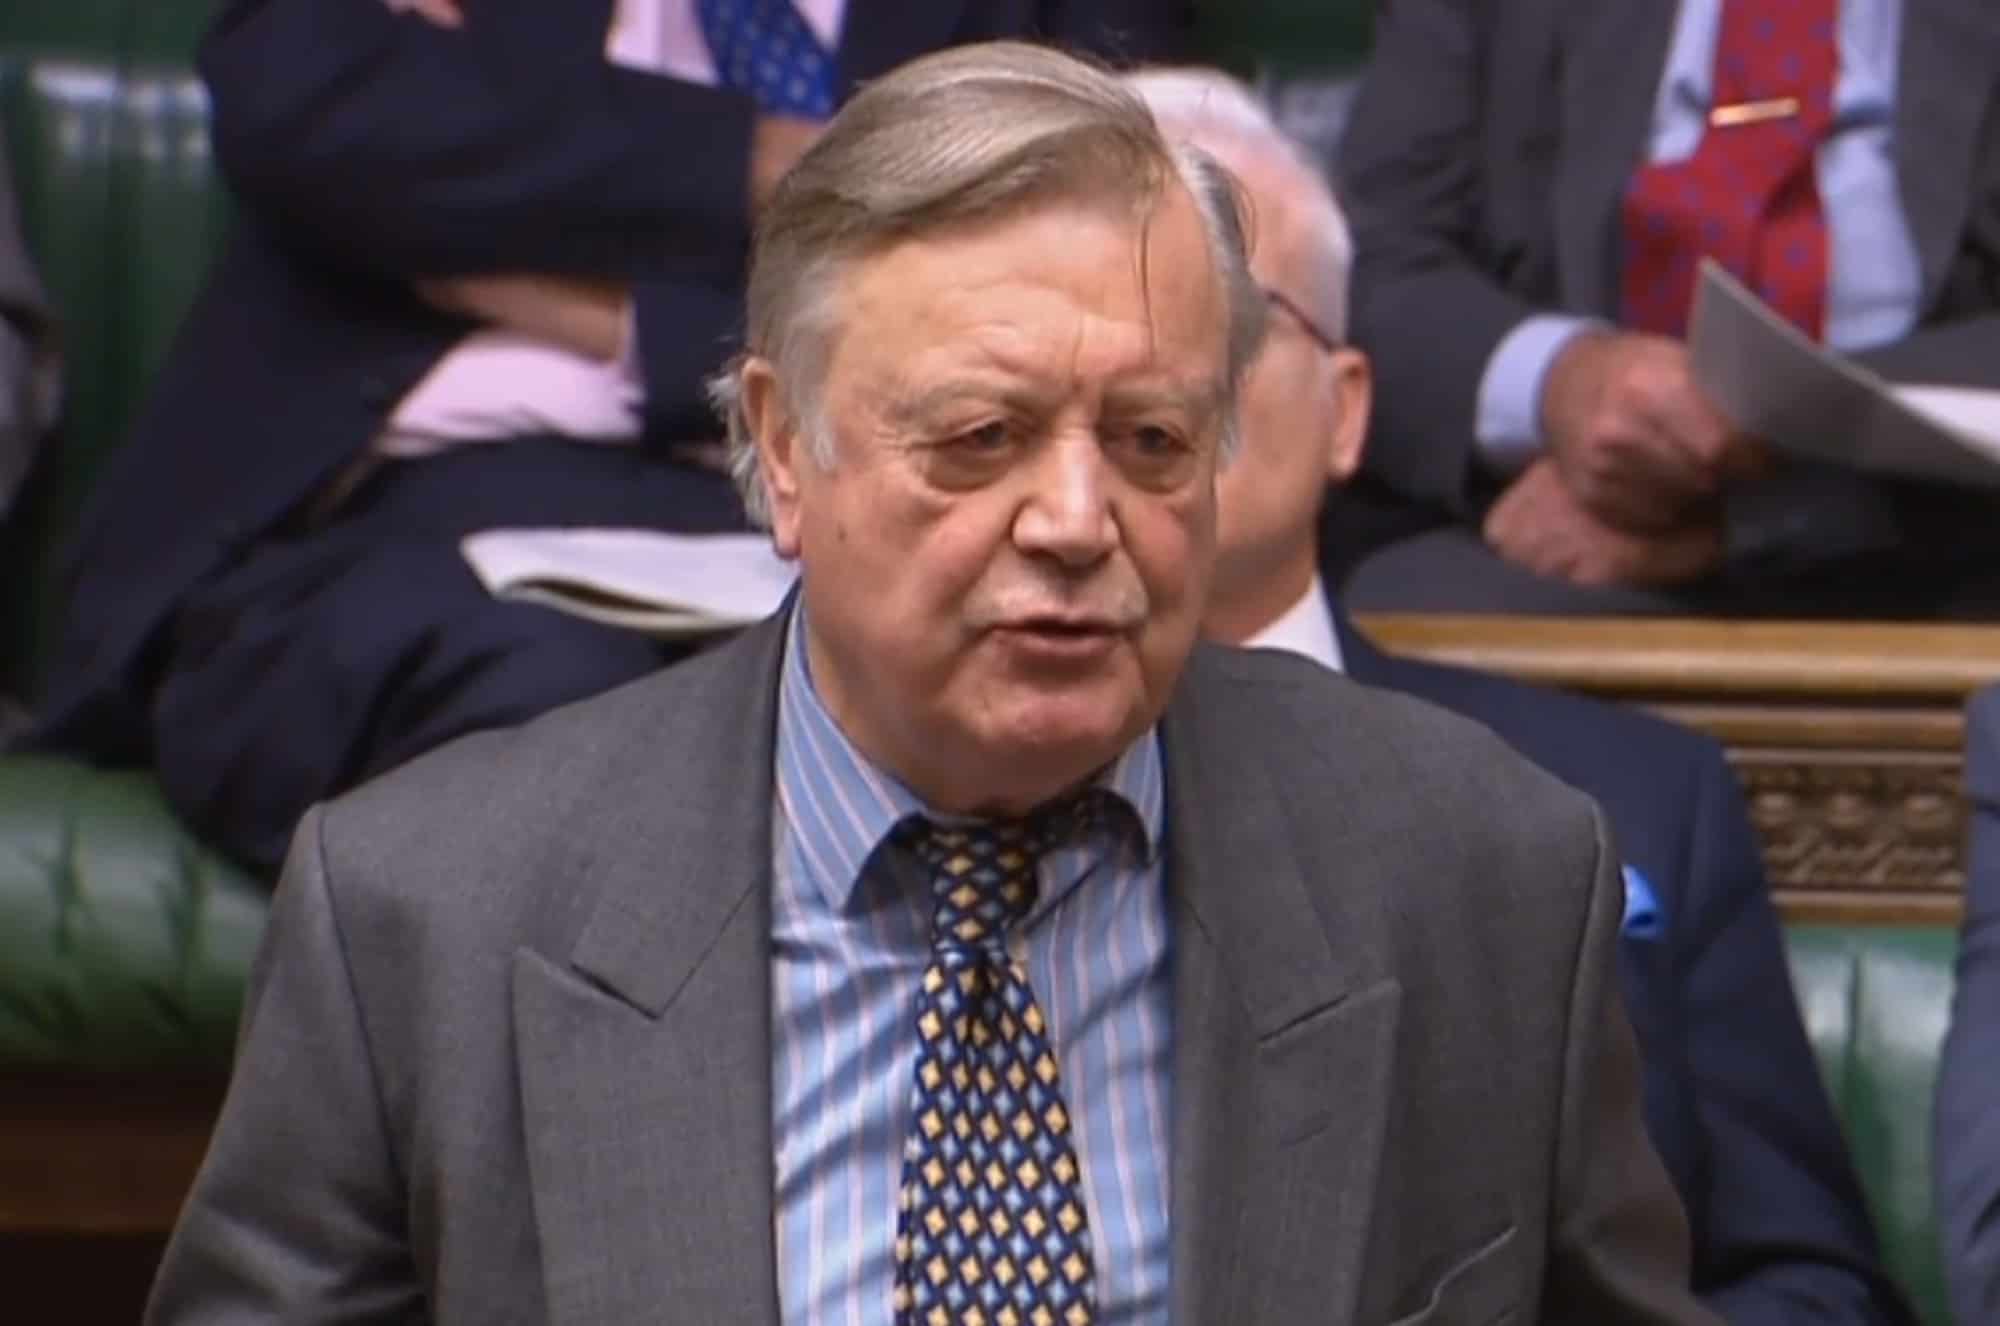 Tory grandee Ken Clarke throws his weight behind Rachel Reeves for chancellor